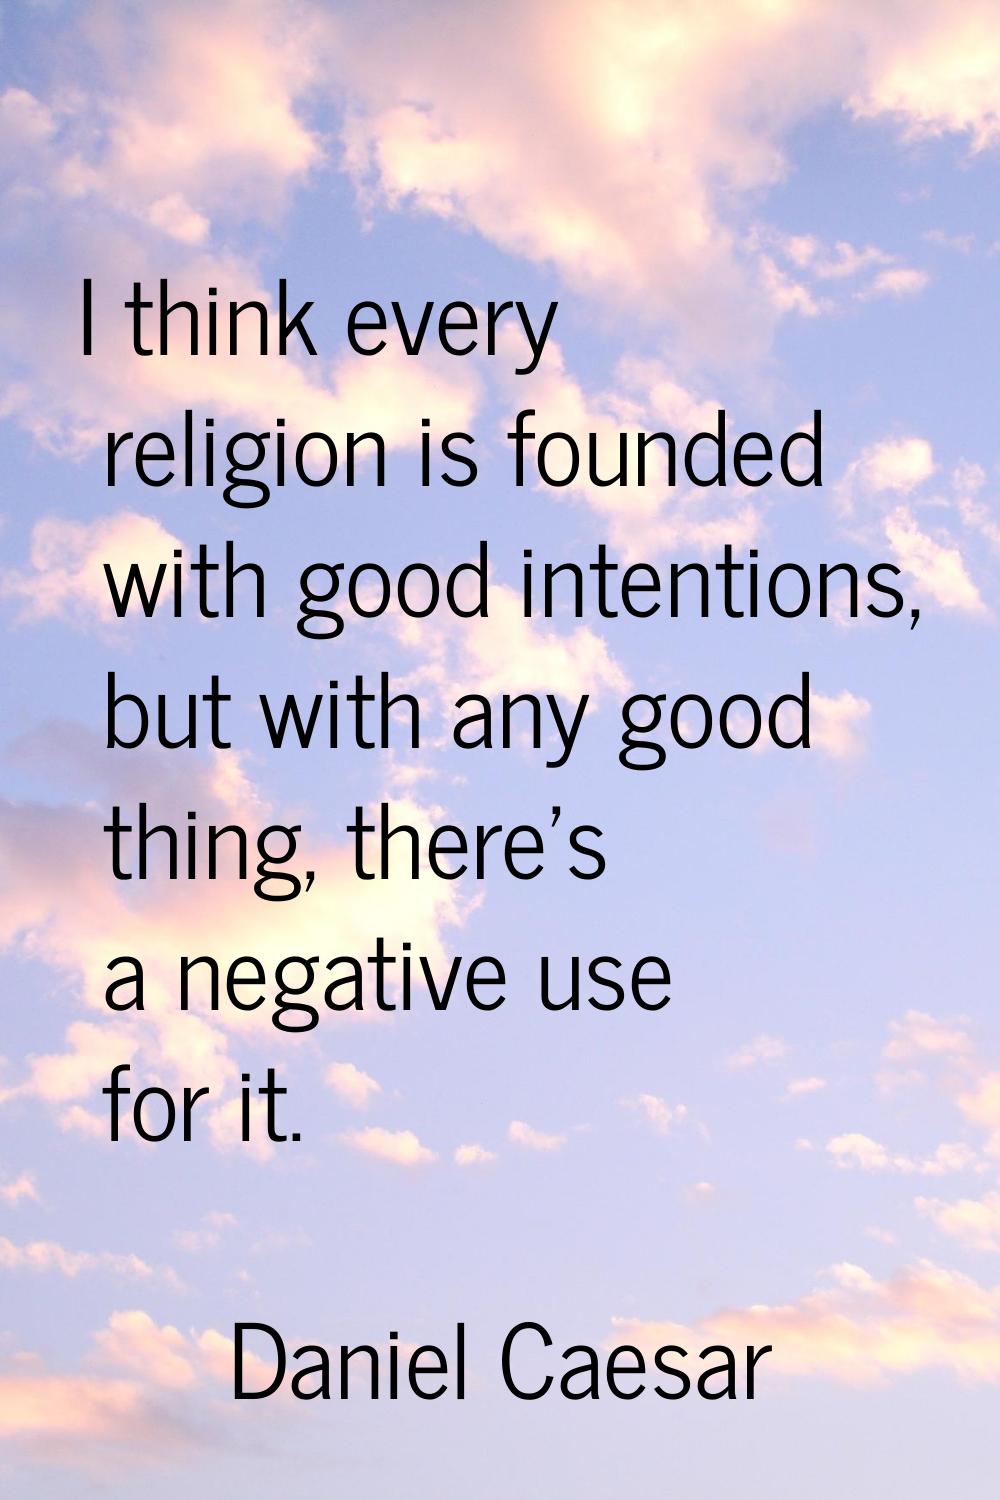 I think every religion is founded with good intentions, but with any good thing, there’s a negative